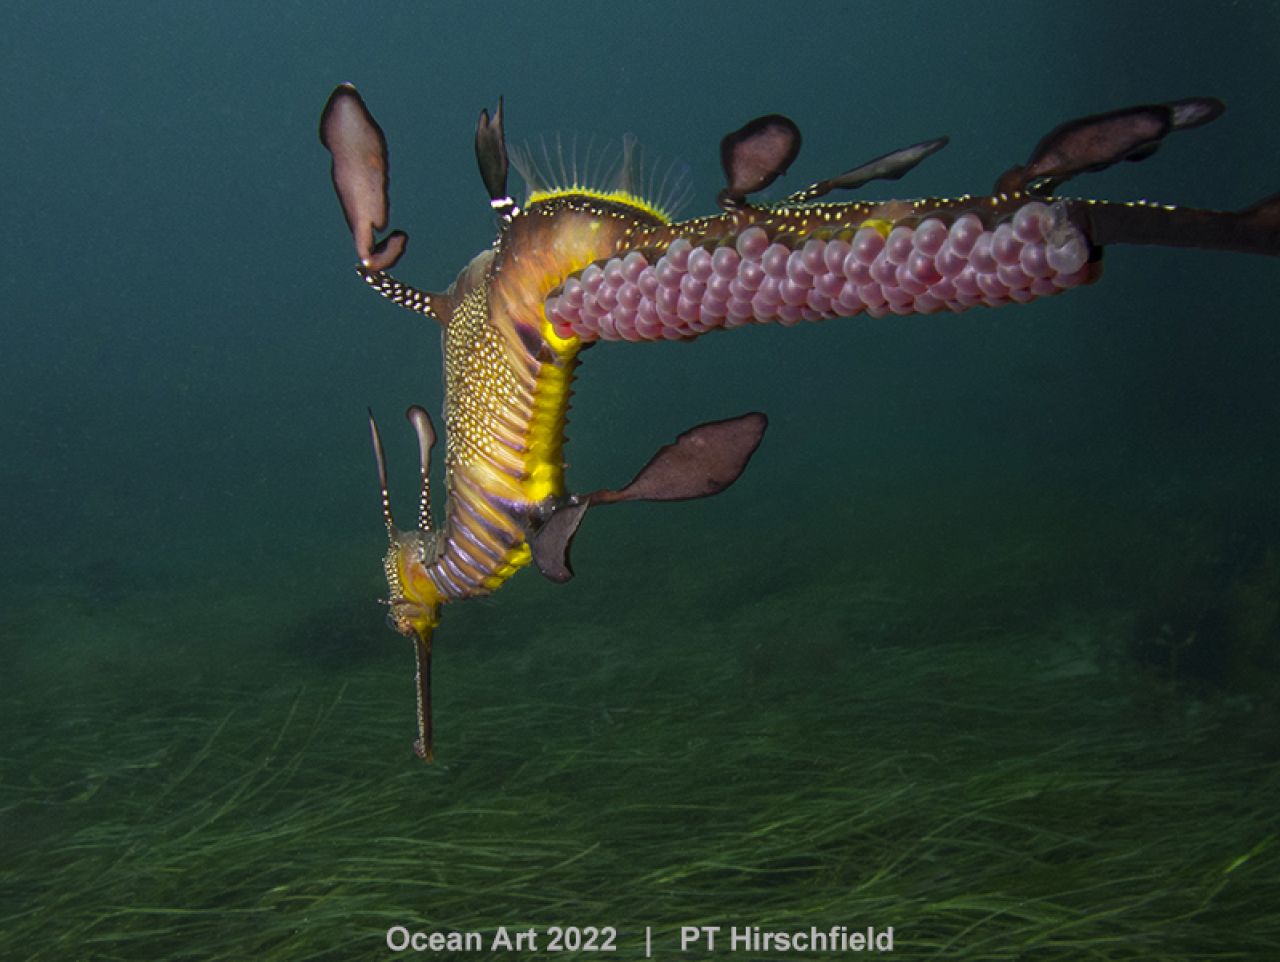 'A Male Weedy Seadragon Carries Pink Eggs On Its Tail'